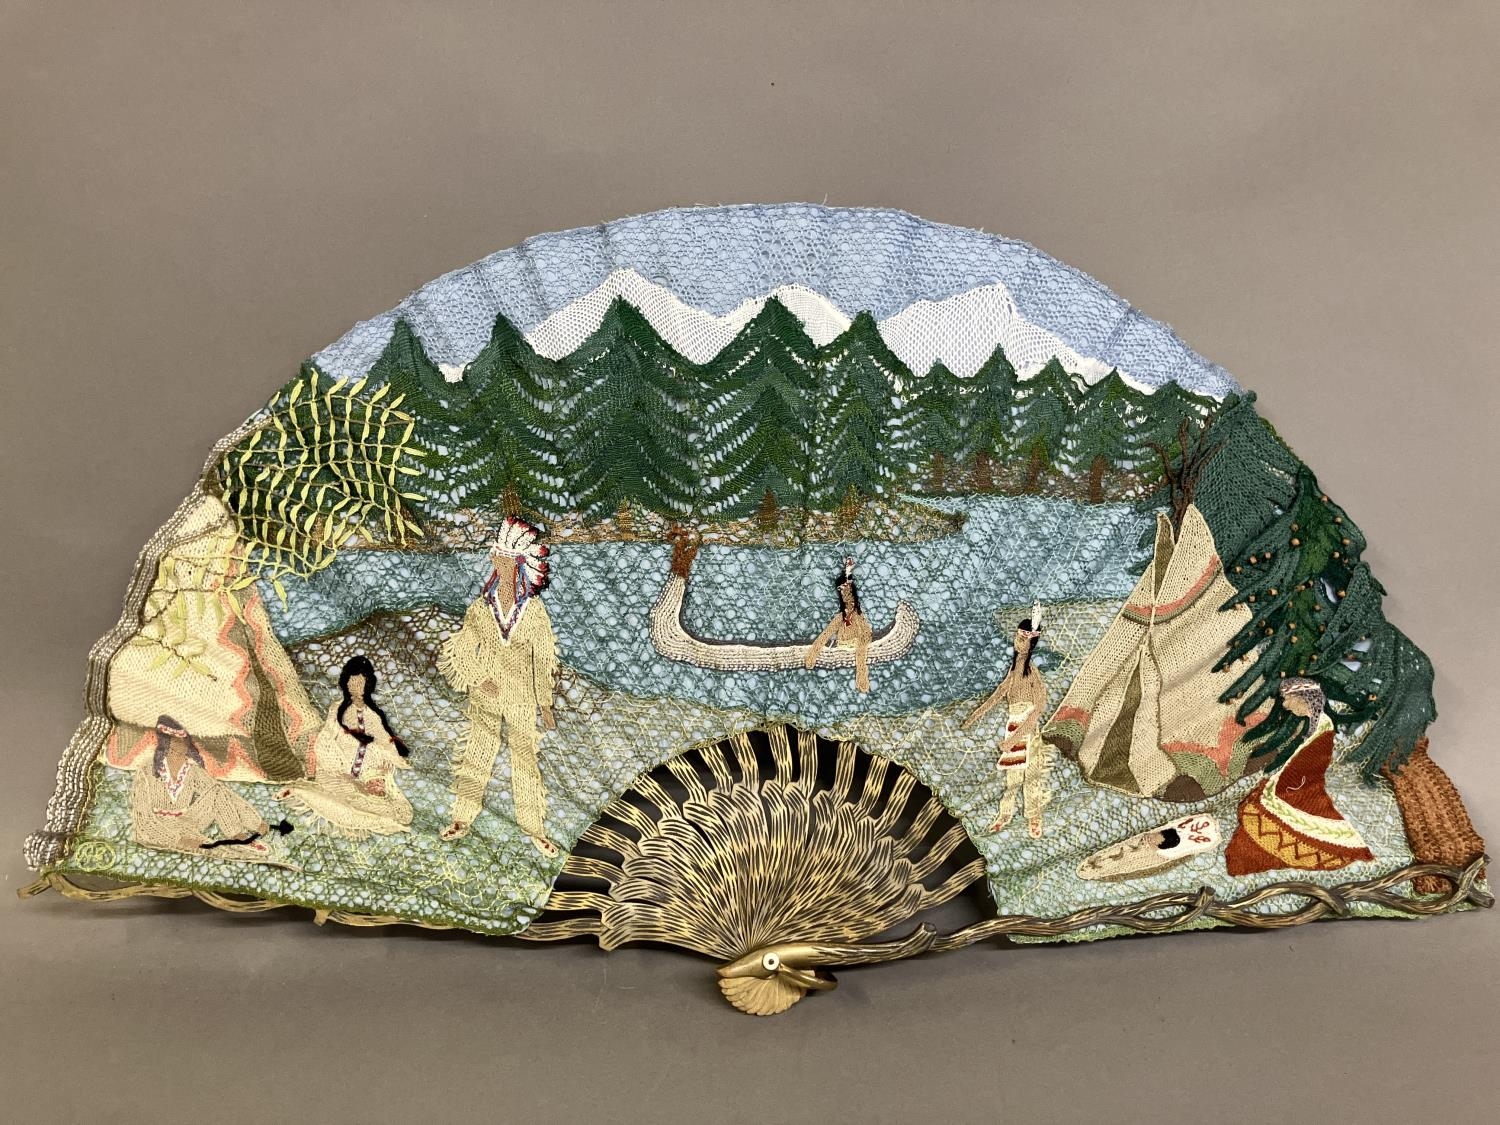 Ann Collier: a unique fan designed by Ann Collier, showing the life stages of Hiawatha, from right